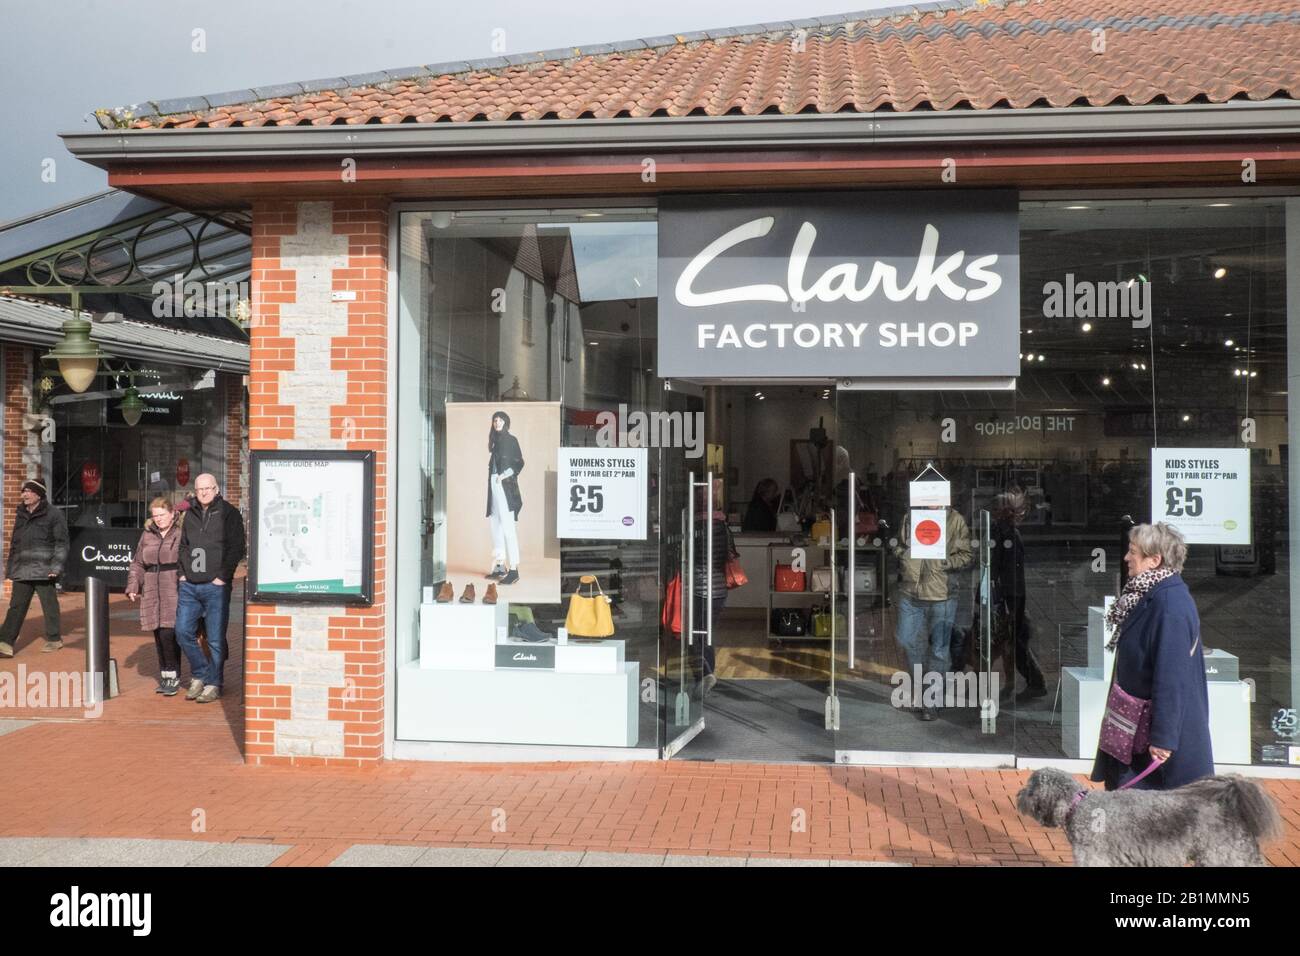 clarks shoes factory shop london woolwich